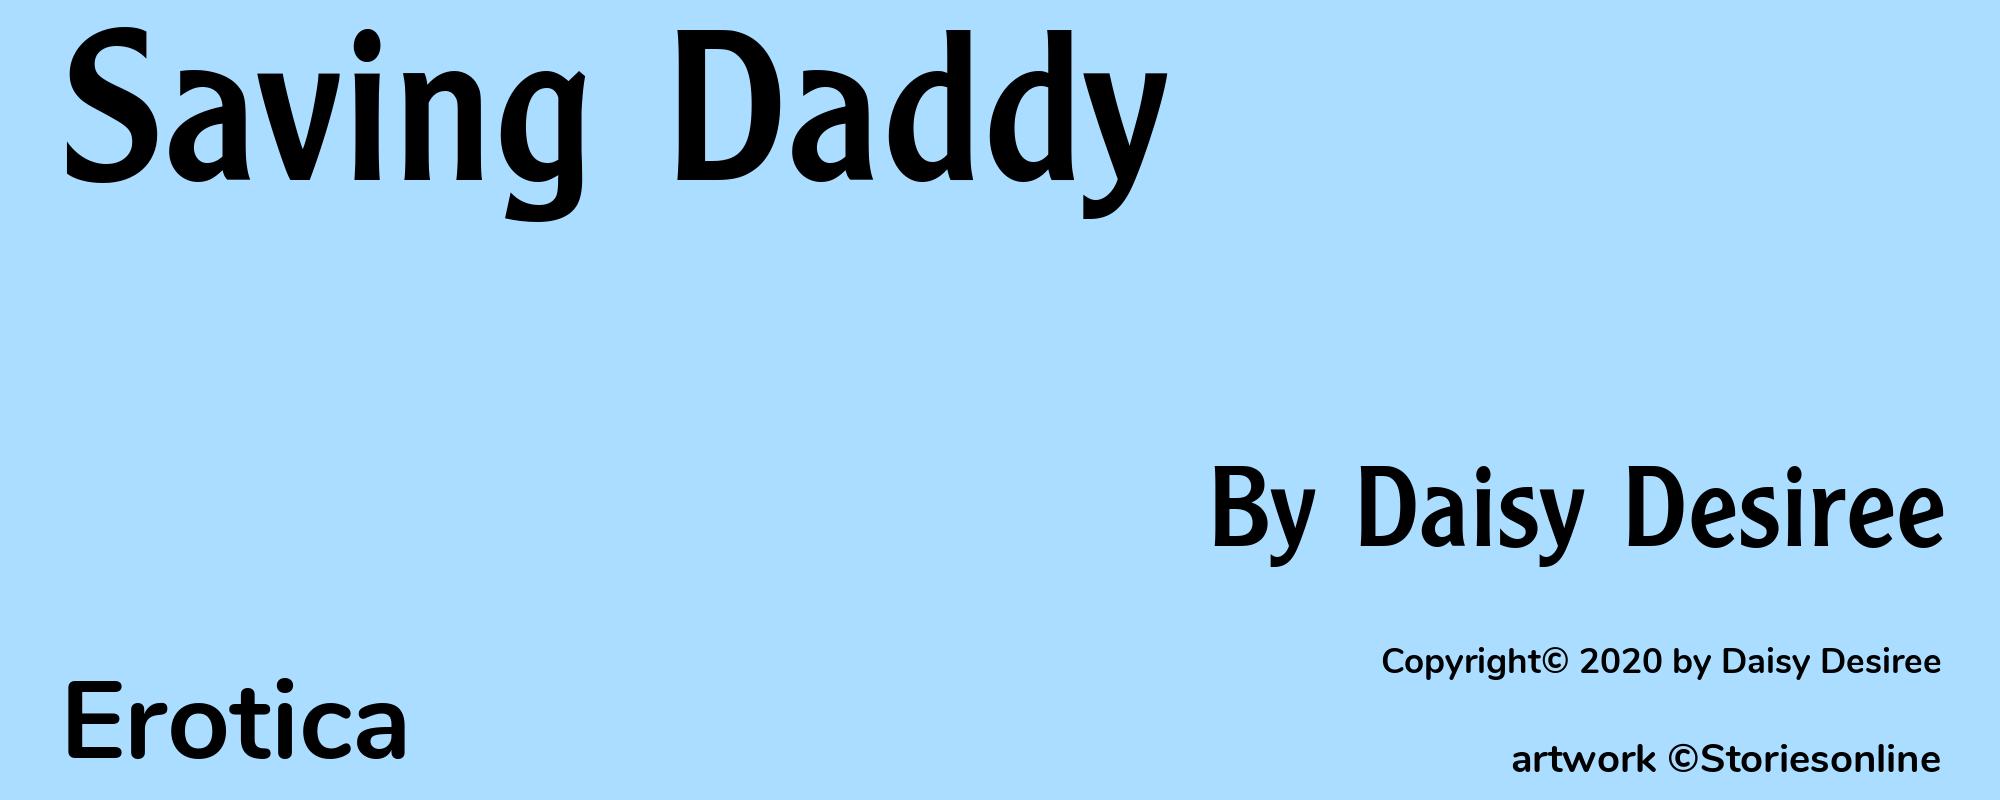 Saving Daddy - Cover